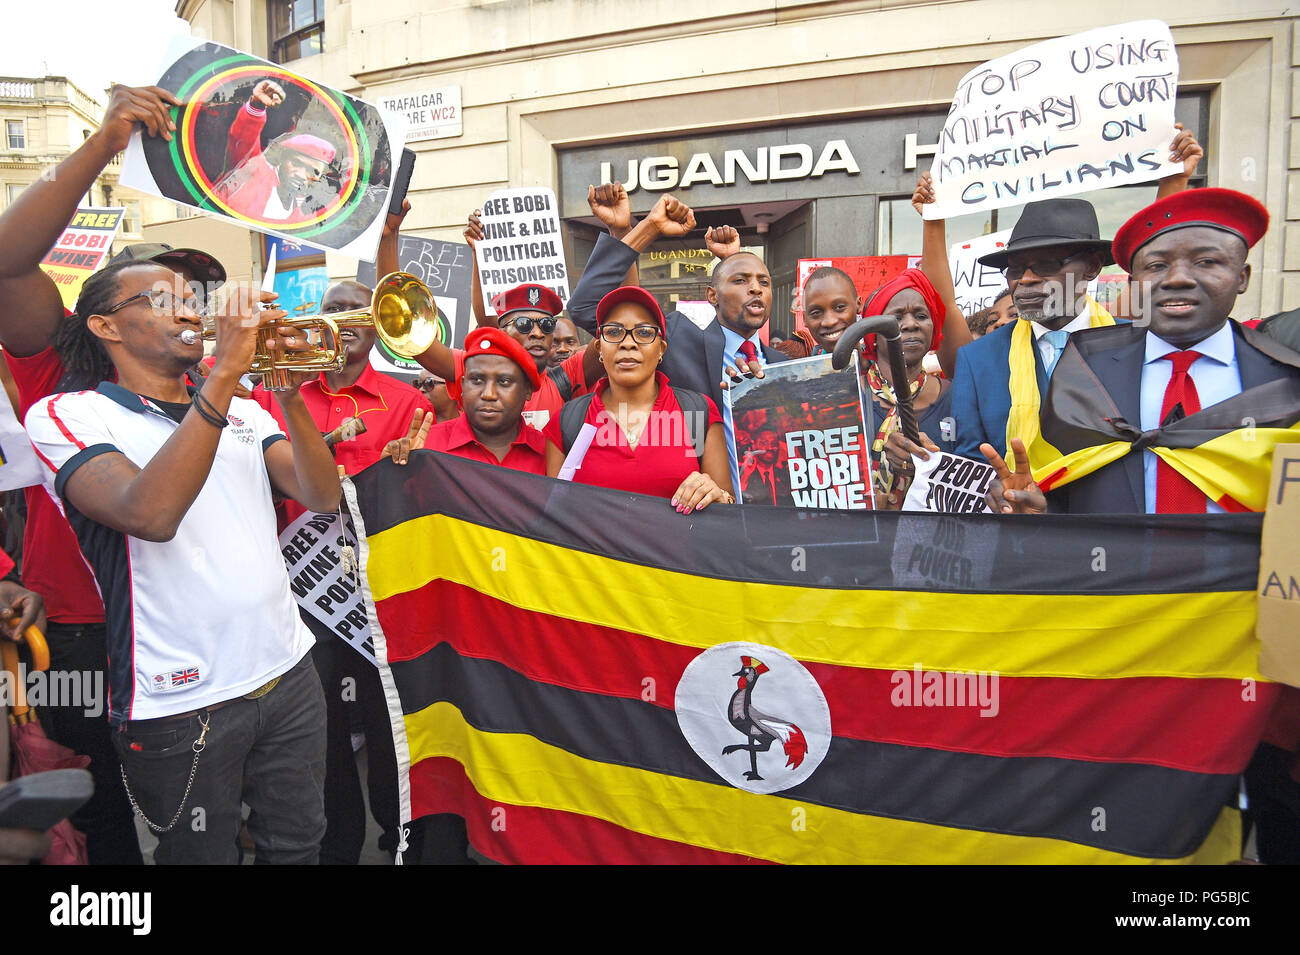 Ugandans protest outside Uganda House in Trafalgar Square, London, after Ugandan pop star-turned-politician Bobi Wine was charged with treason in a civilian court, minutes after a military court dropped weapons charges. Stock Photo